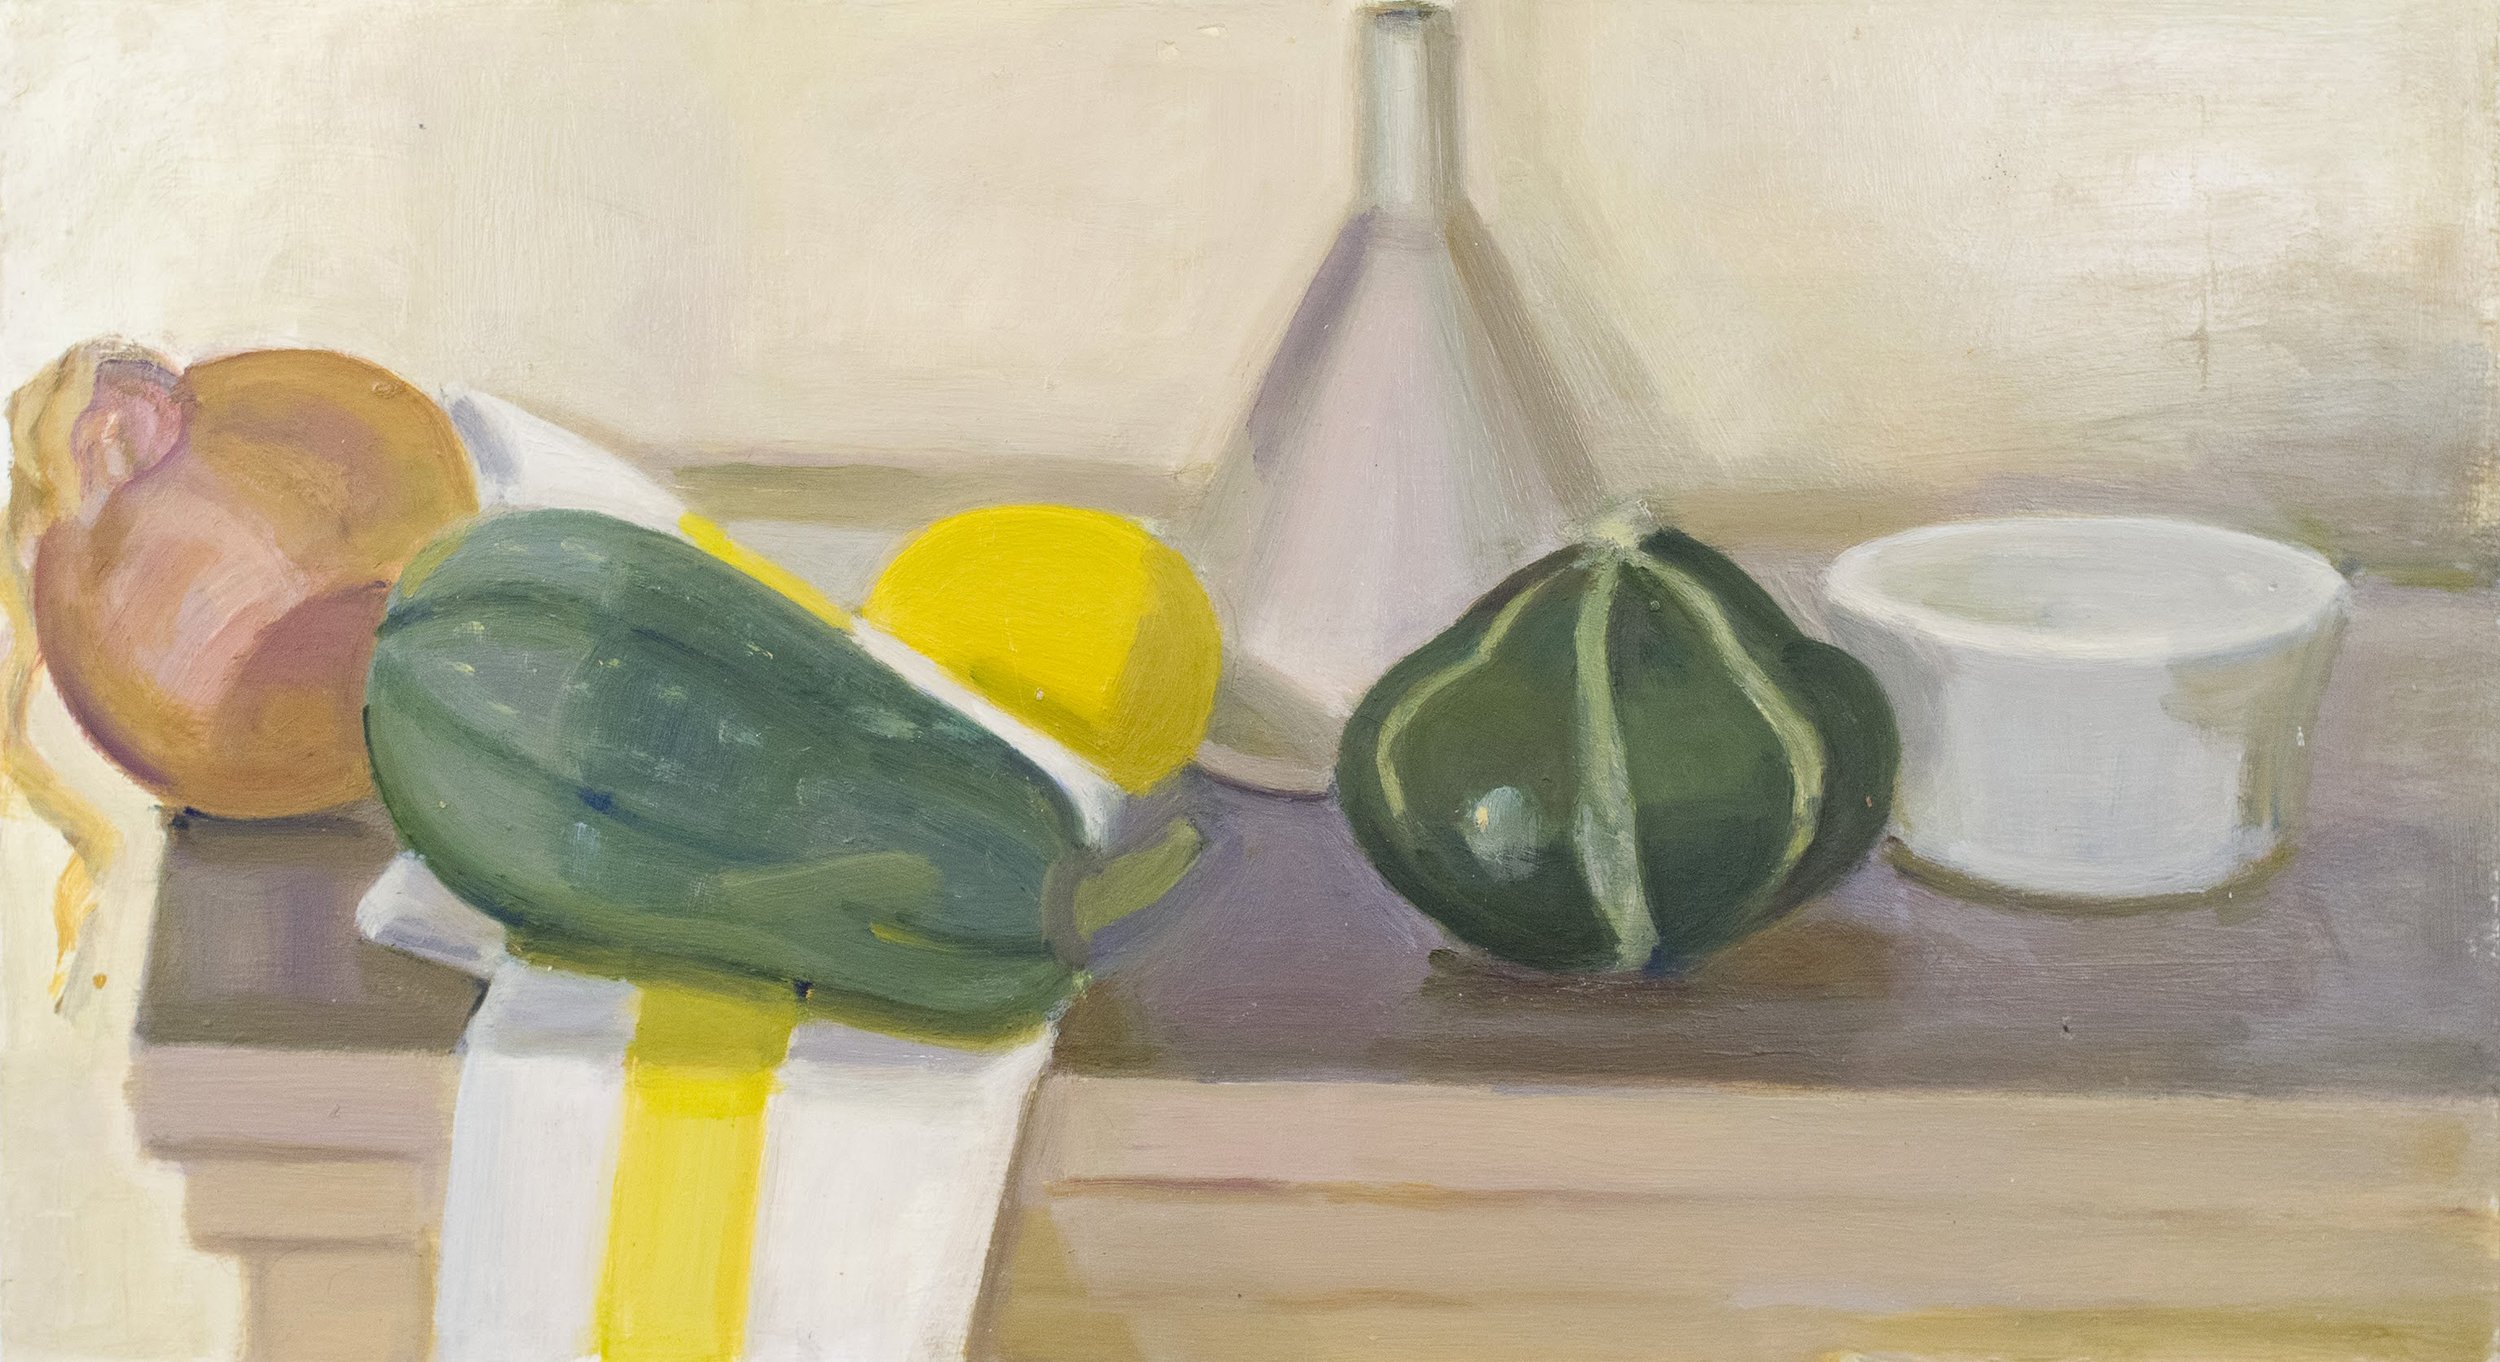   Onion, Tiger Squash, Lemon, Funnel and Yellow-striped Napkin , 2018, oil/panel, 10 x 18 in. (Private collection) 